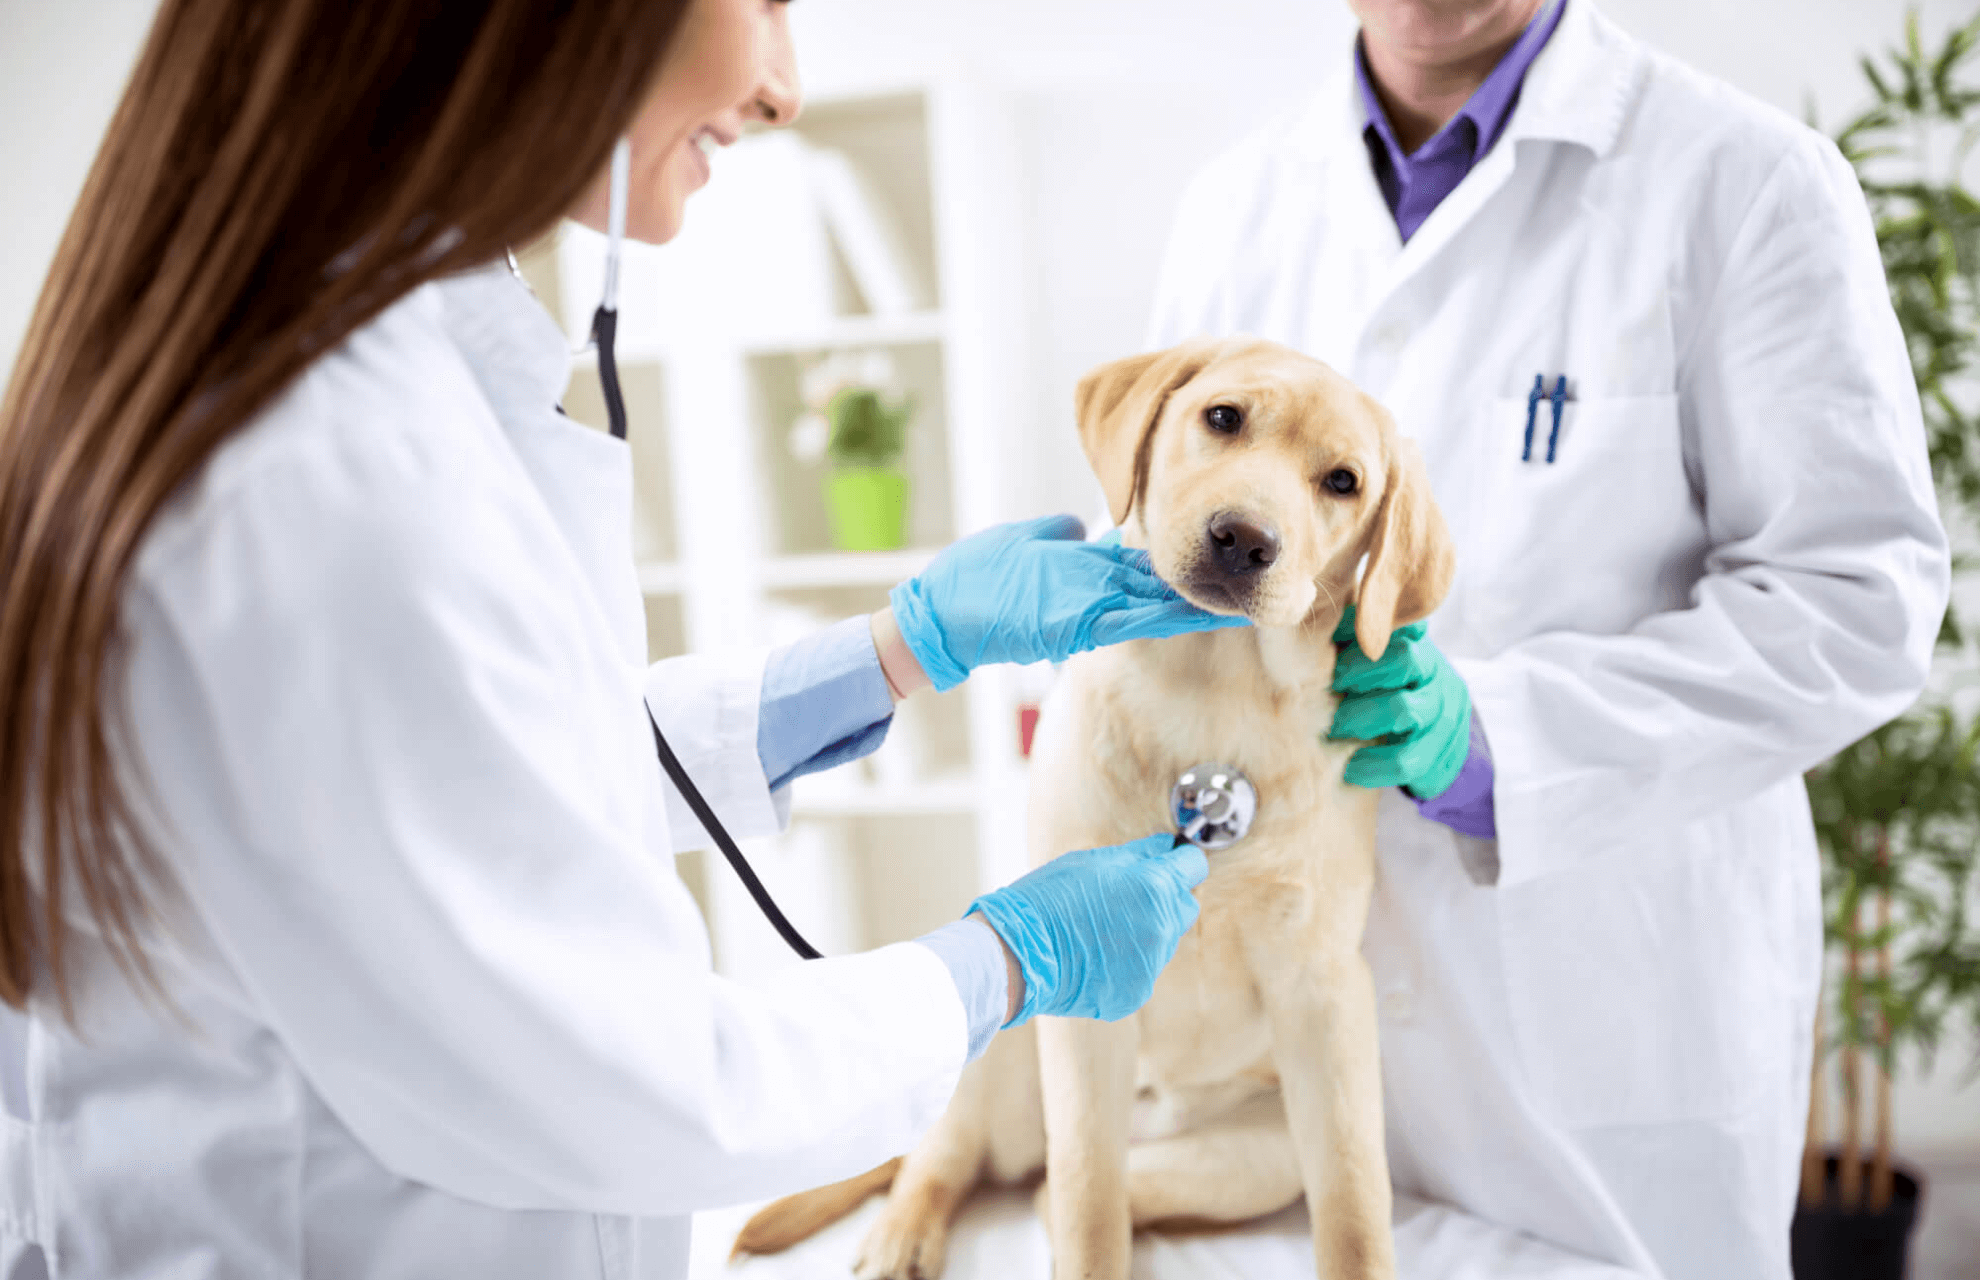 Dog being examined by vets